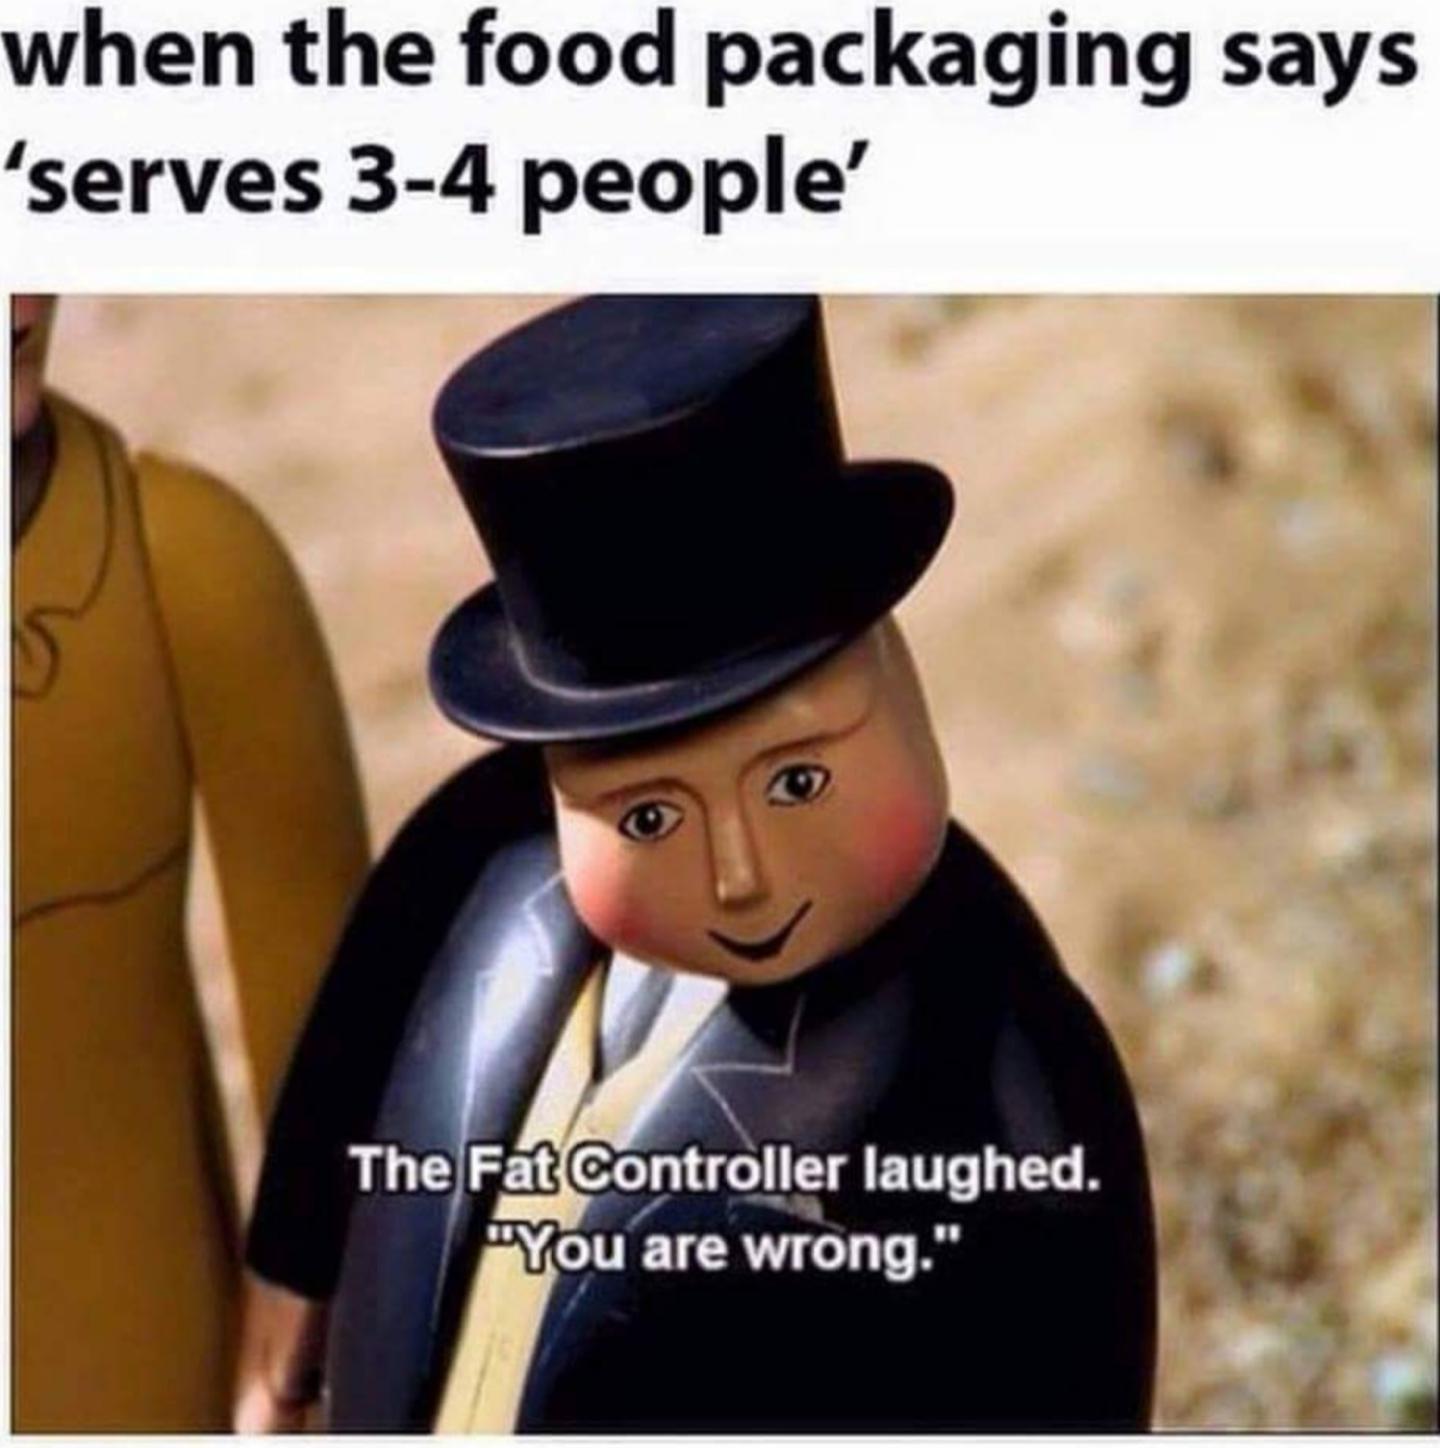 dank memes - funny memes - fat controller laughed you are wrong meme - when the food packaging says 'serves 34 people' The Fat Controller laughed. "You are wrong."